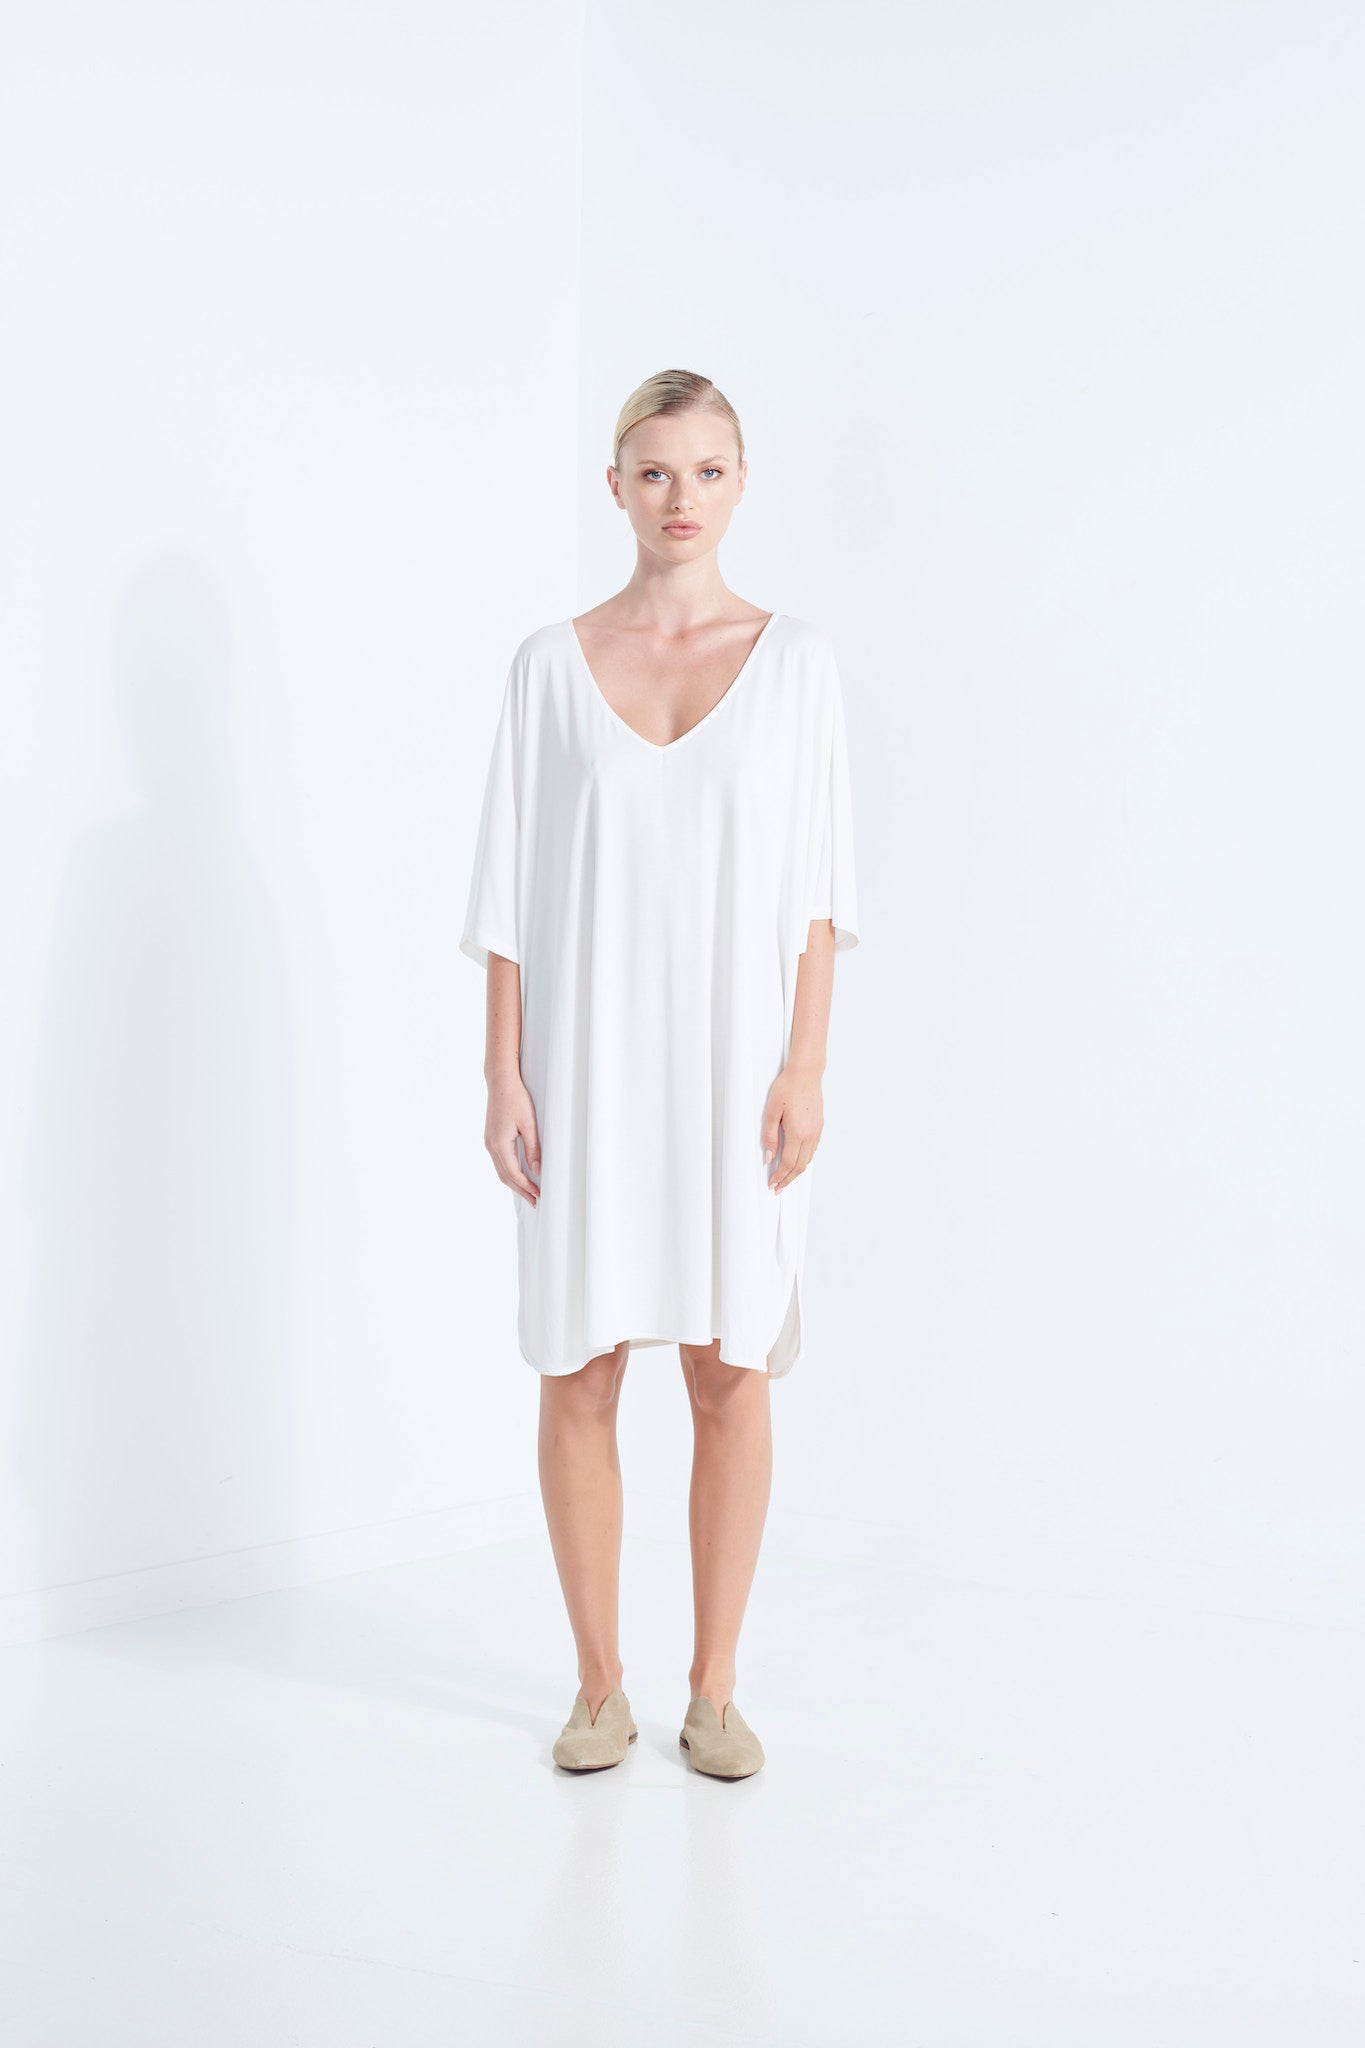 THEMIS DRESS LONGLINE T-SHIRT BEECHWOOD MODAL STRETCH WITH REMOVABLE TIE DEW MILKY WHITE  STRAIGHT FRONT VIEW